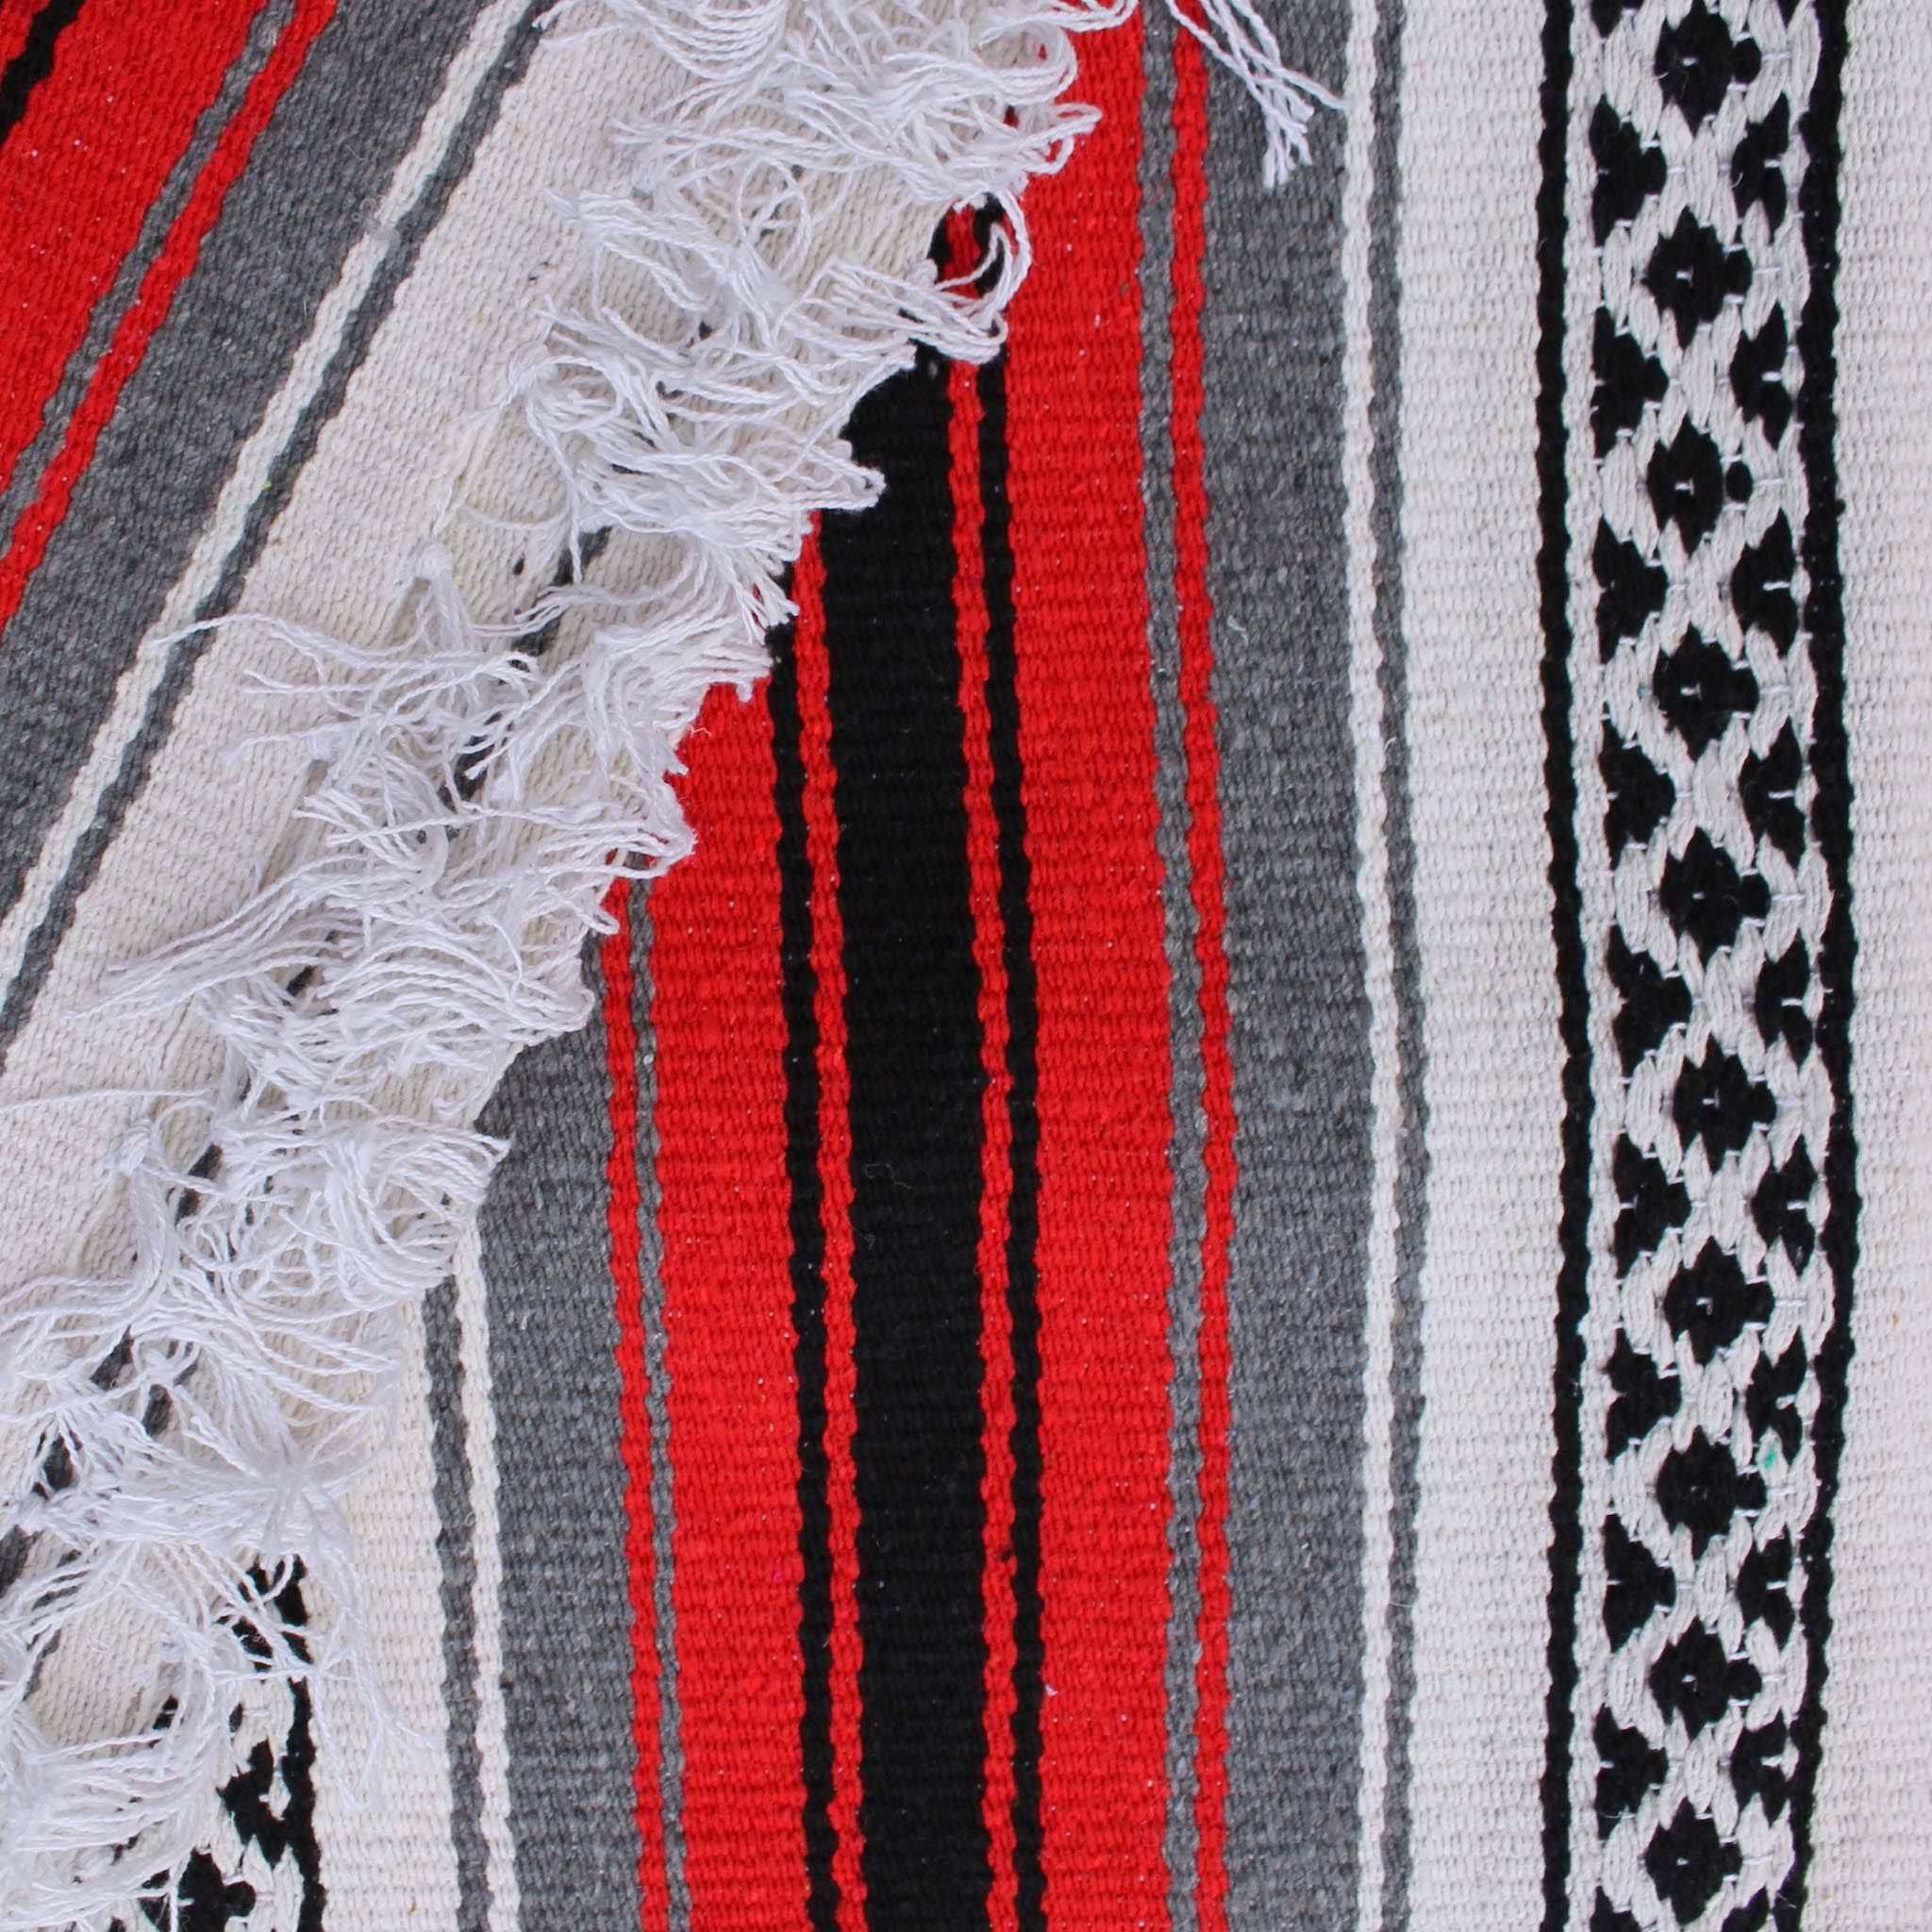 Close-up of blanket woven with alternating solid stripes in white, black, grey and chocolate brown, and white stripe with pattern of small black diamonds, edge of blanket has white fringe.